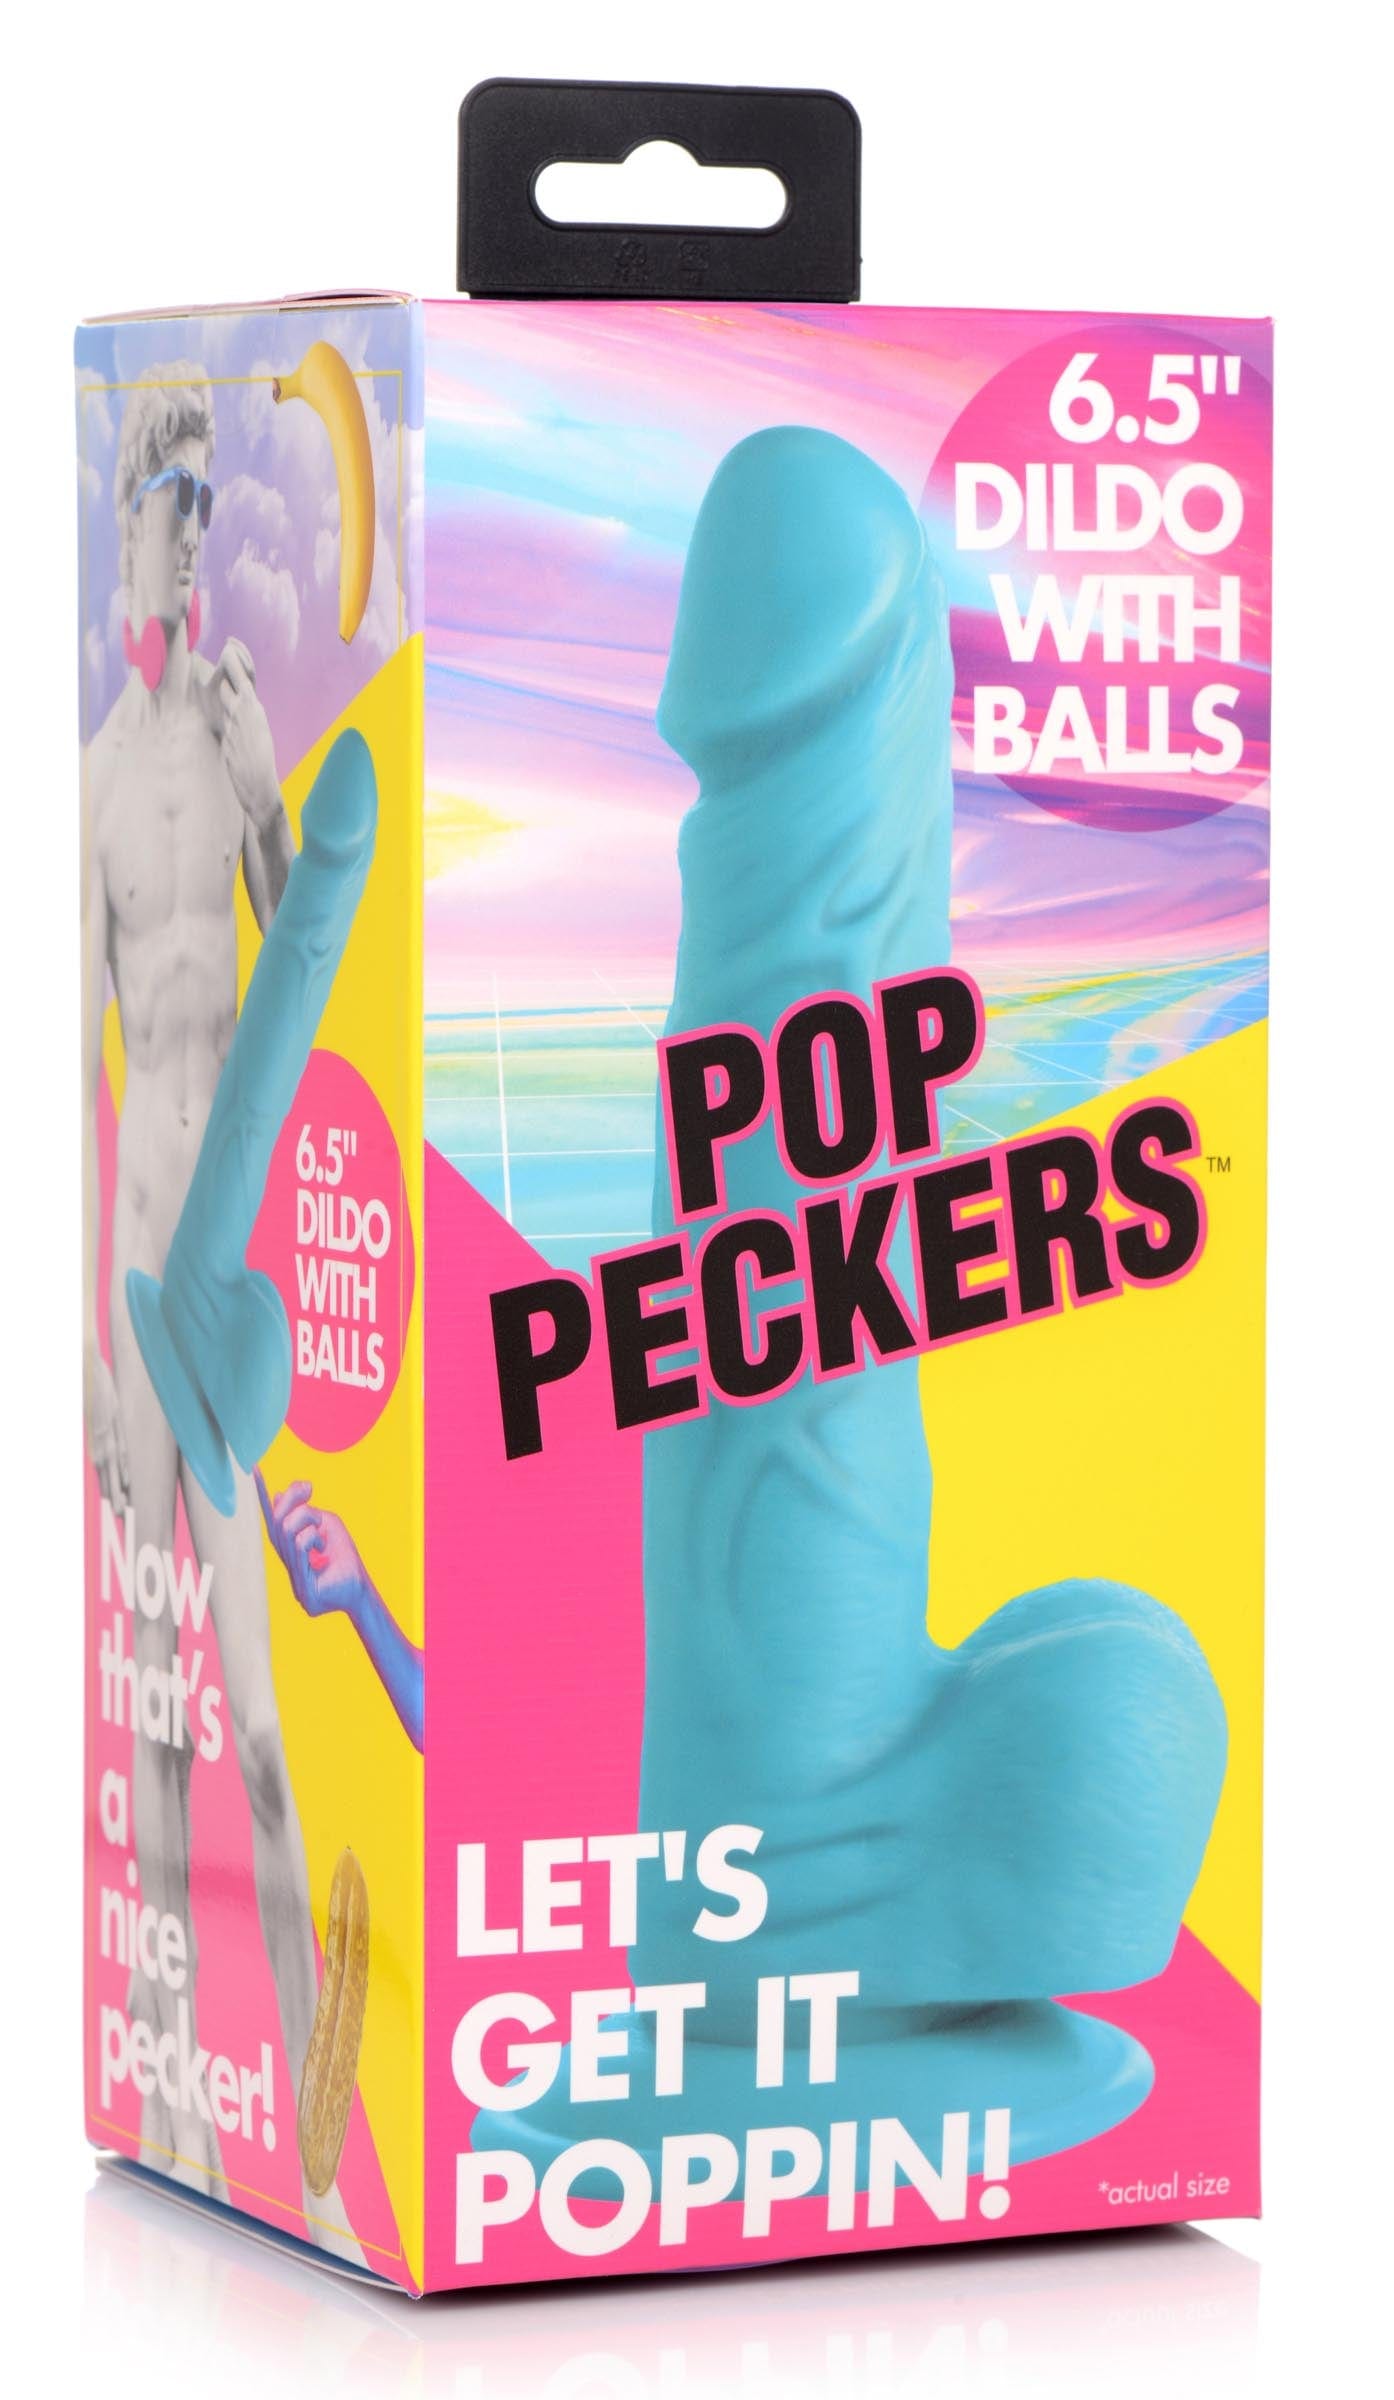 Pop Peckers Realistic Dildo Blue Pop Peckers 6.5" Dildo with Balls at the Haus of Shag